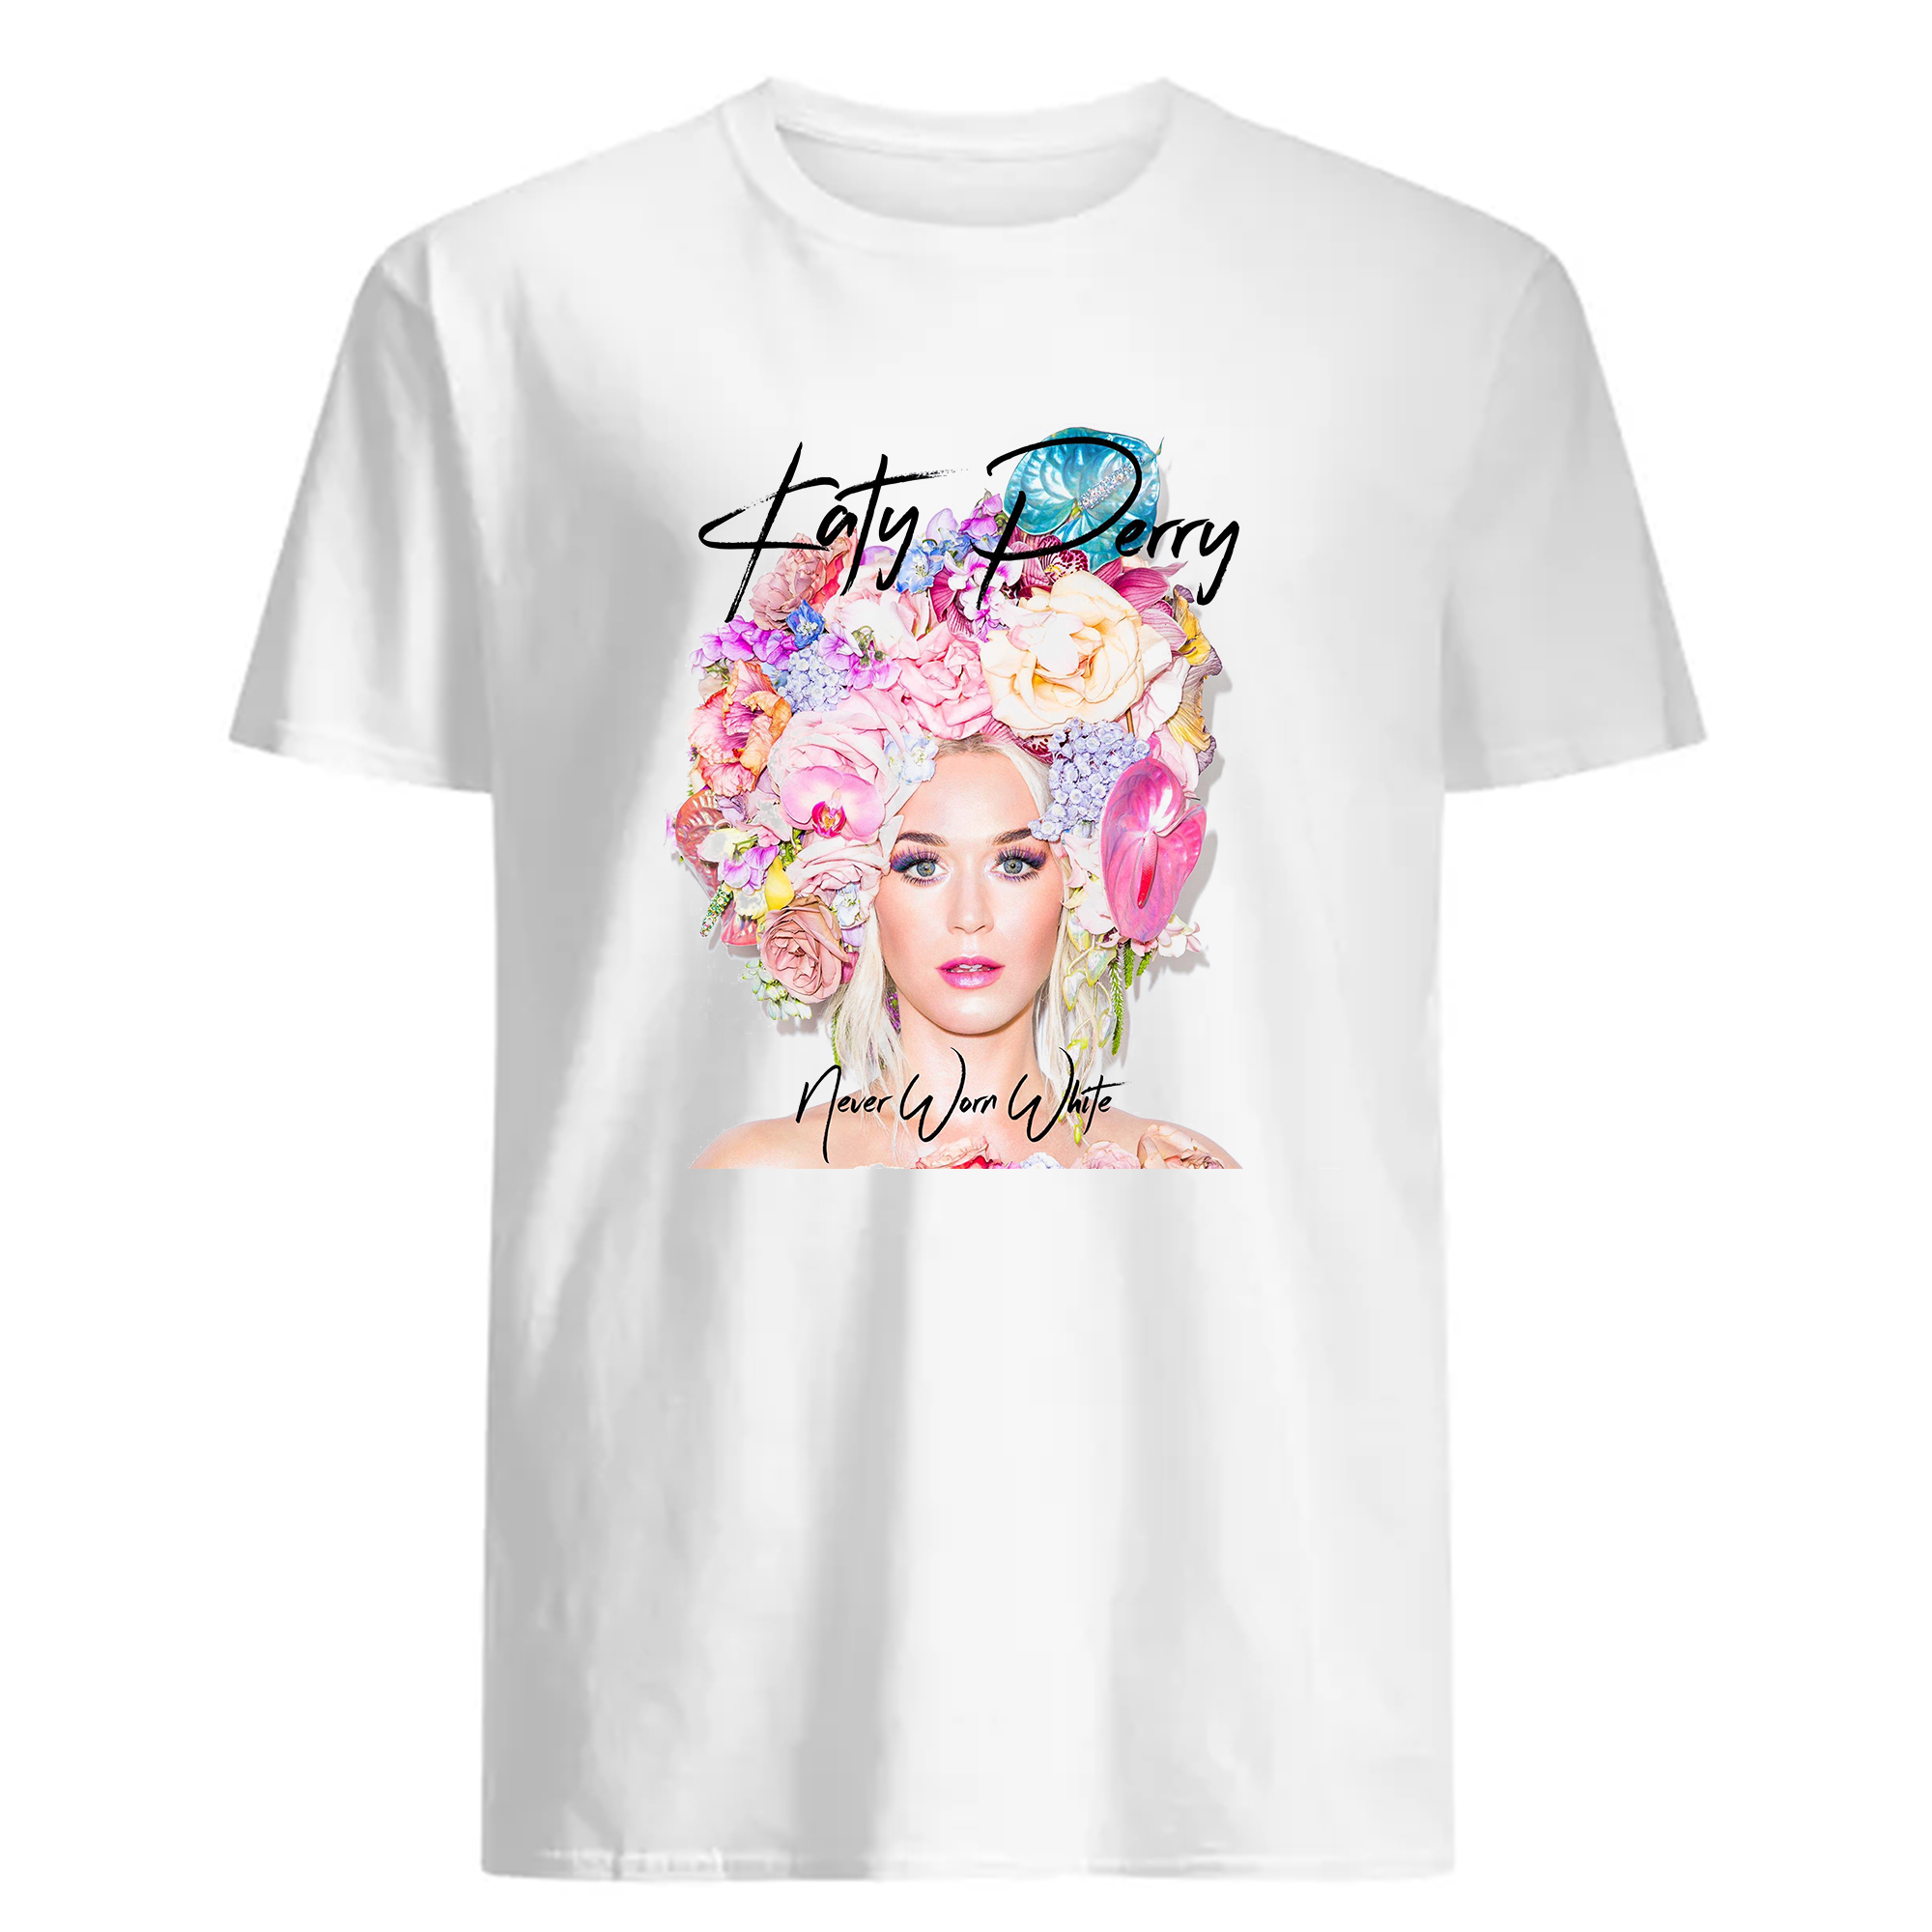 Never Worn White Katy Perry T Shirt Print By Clothenvy - roblox song ids firework katy perry